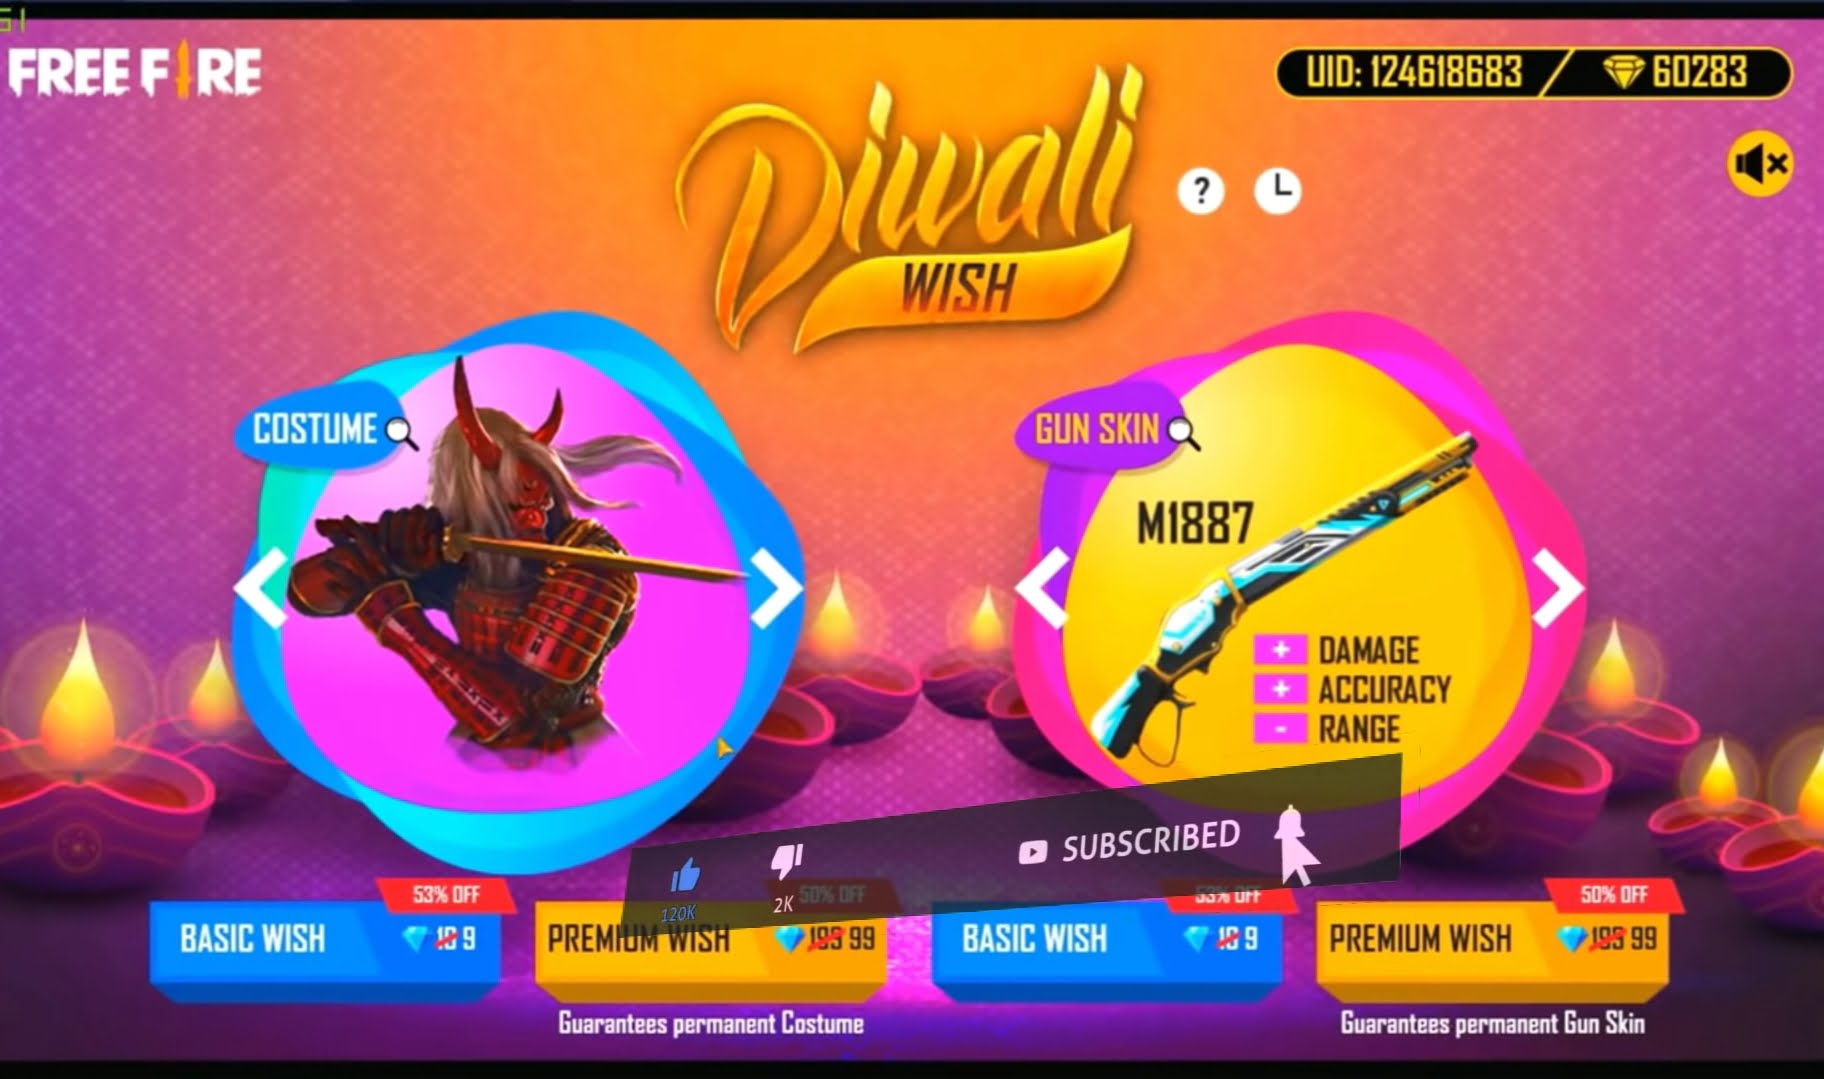 Upcoming Diwali Event to Free Fire 2021